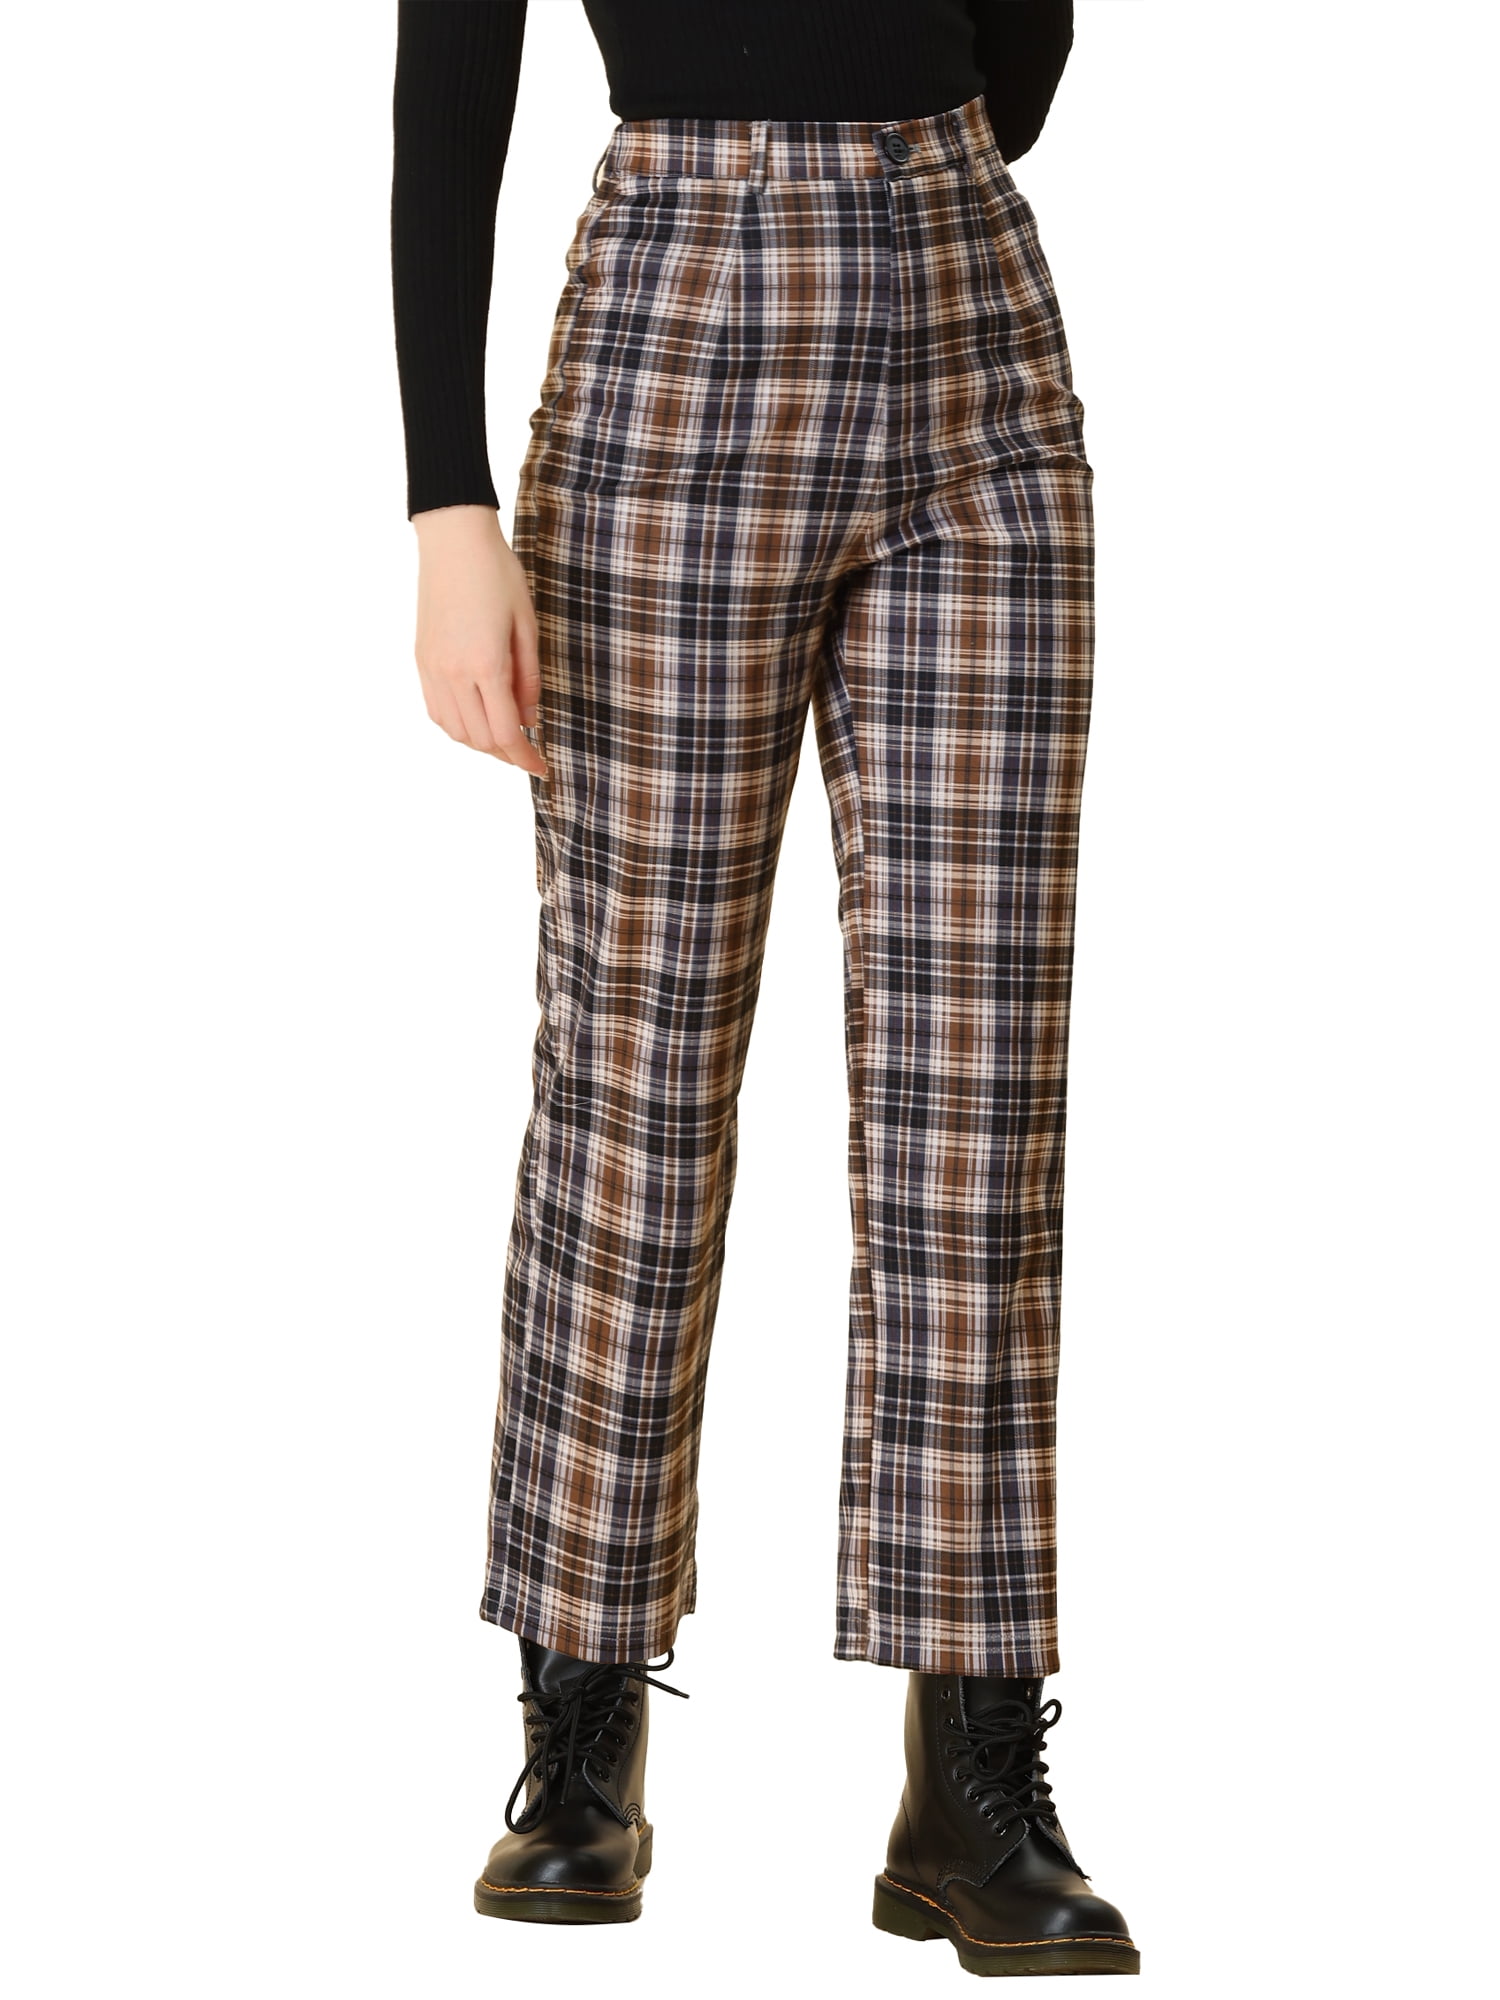 Pan Con Chocolate - Girls Brown Check Trousers | Childrensalon Outlet